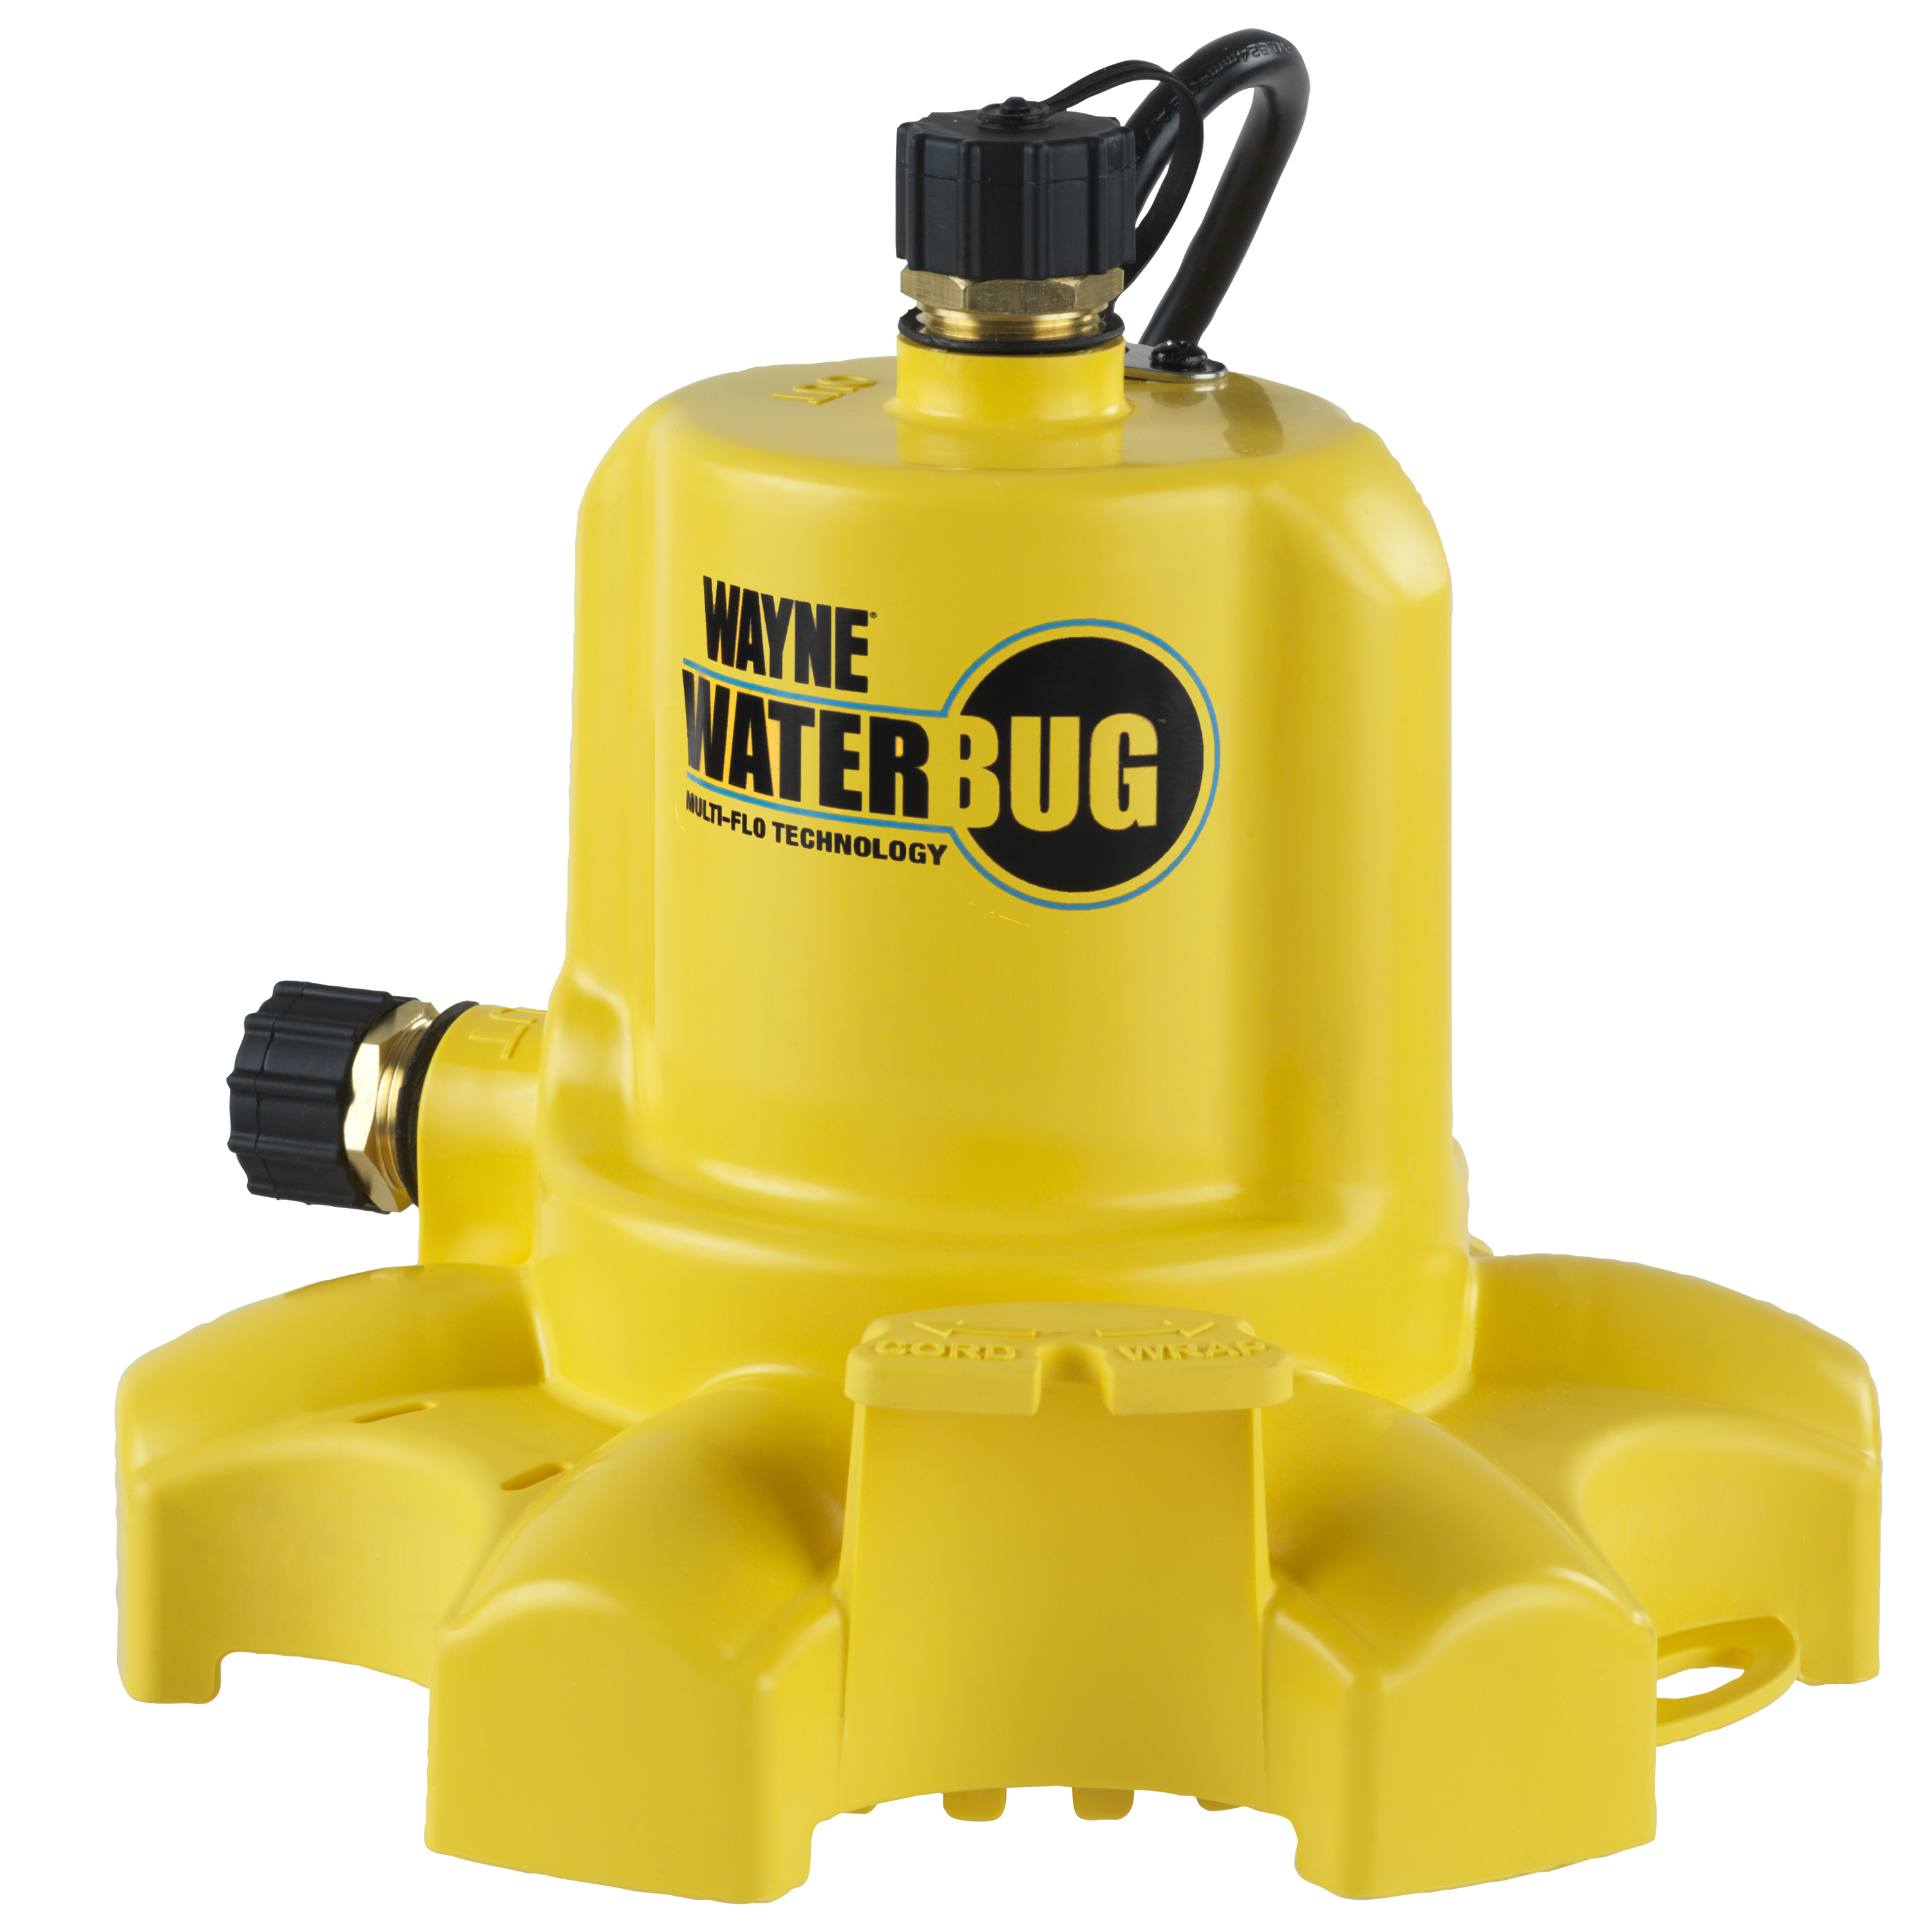 WAYNE Pumps' WaterBUG features multi-flow technology, making it the perfect water removal tool for any home.